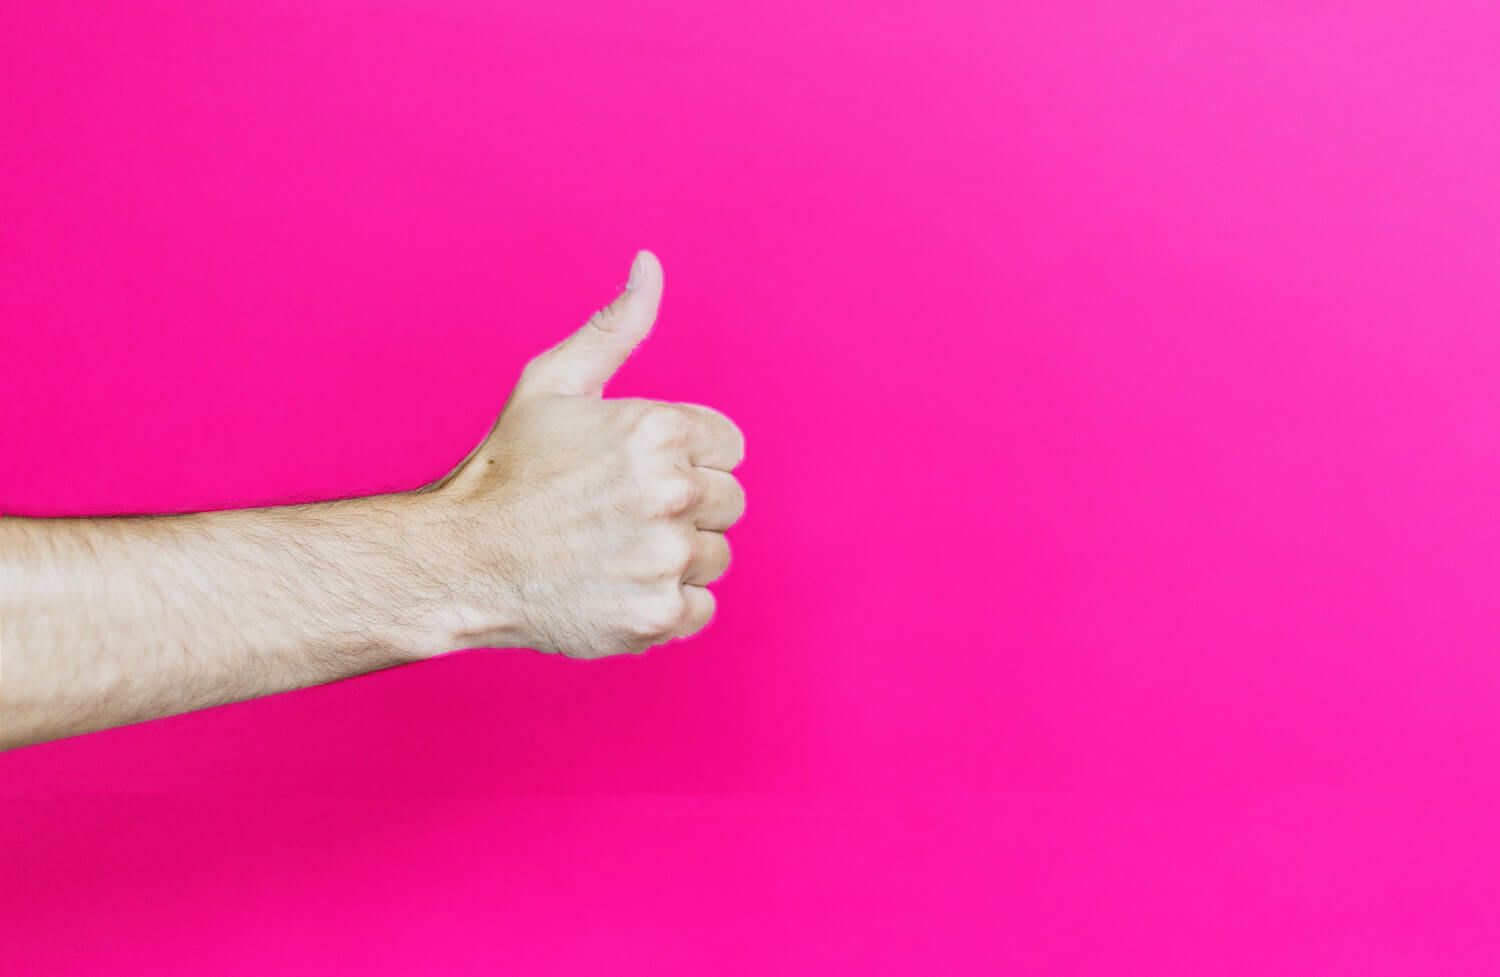 Male arm making thumbs up gesture against a bright pink background